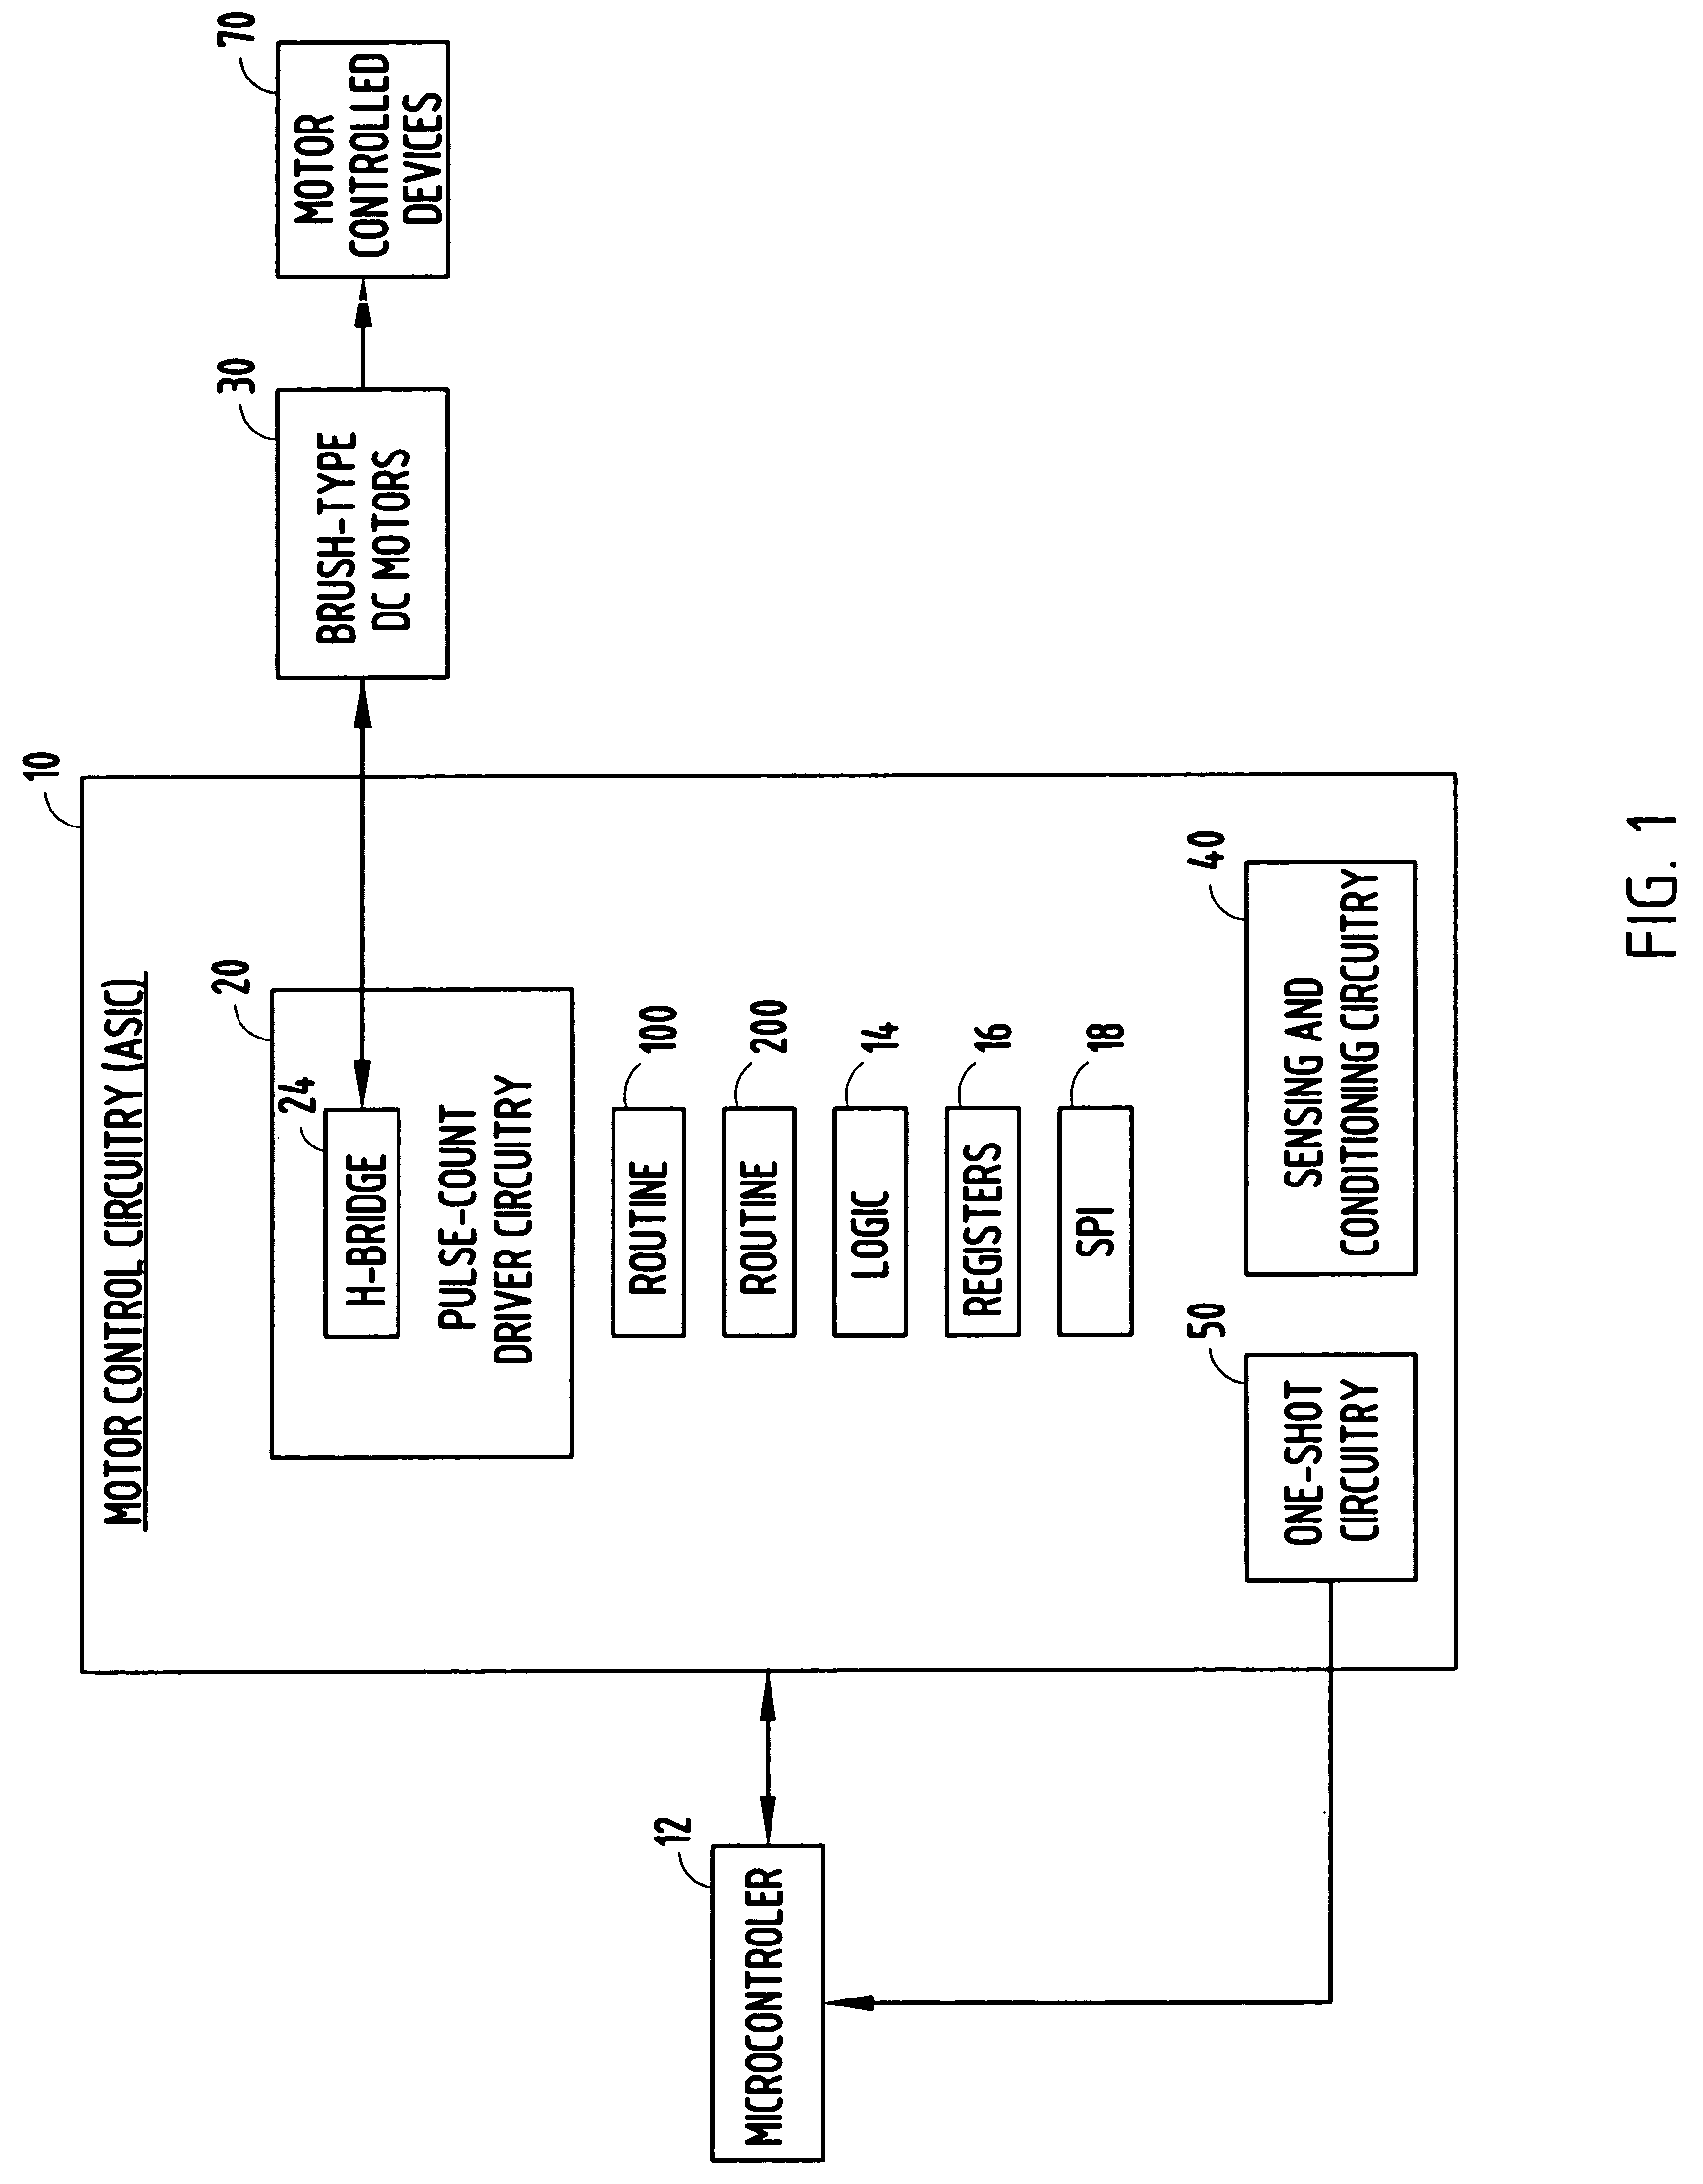 Position detection and external driver multiplexing system for DC motors